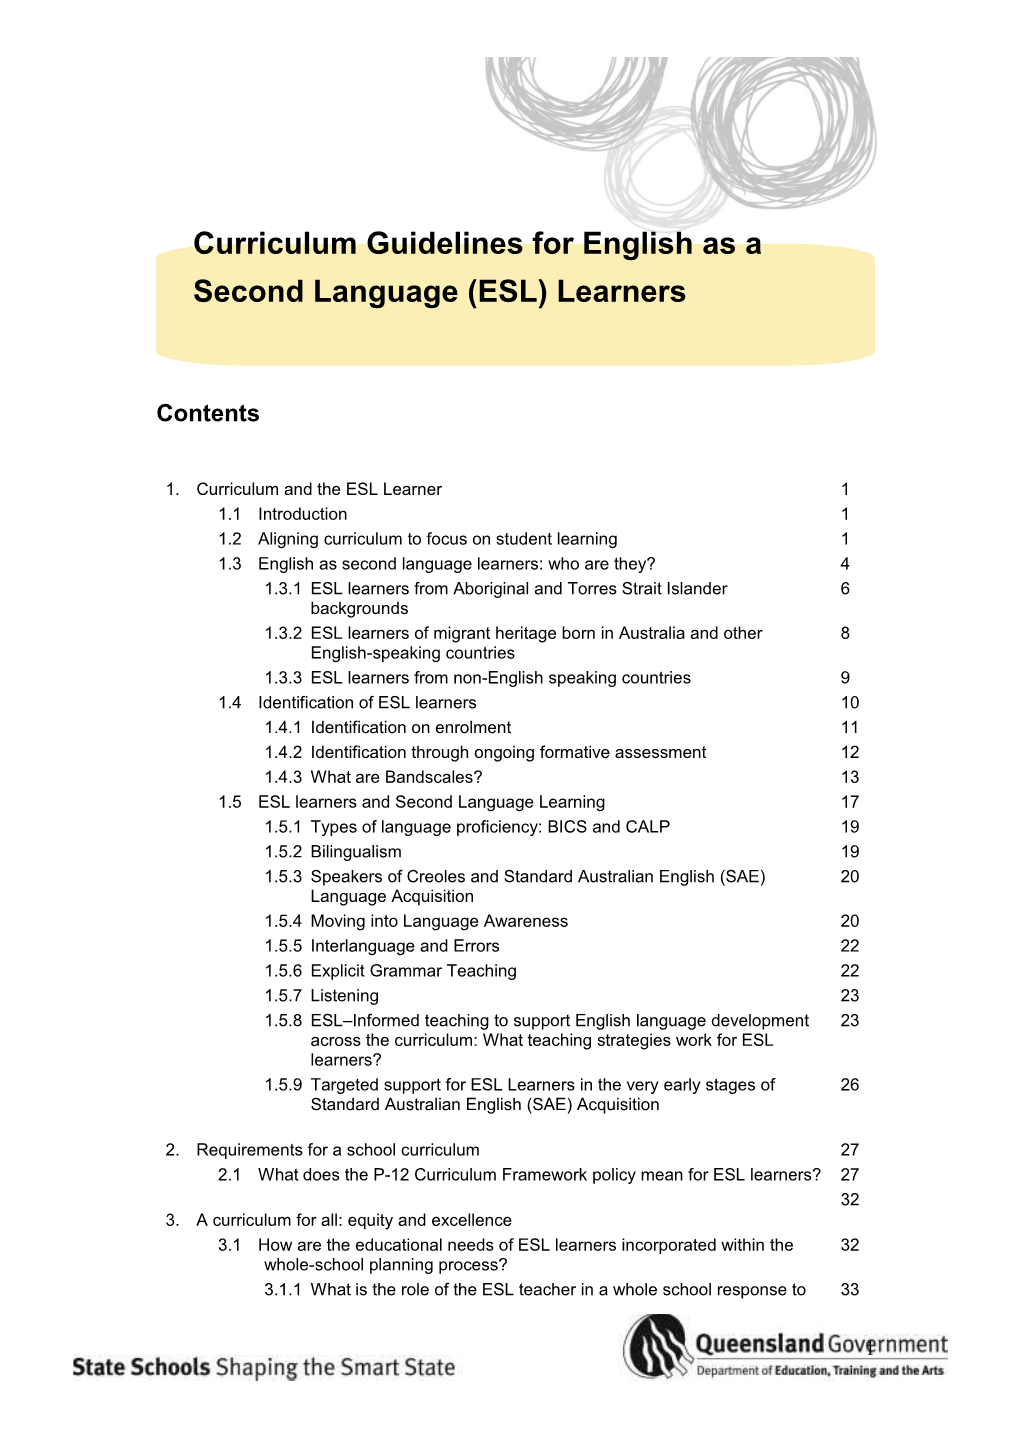 Guidelines For English As Second Language (ESL) Learners